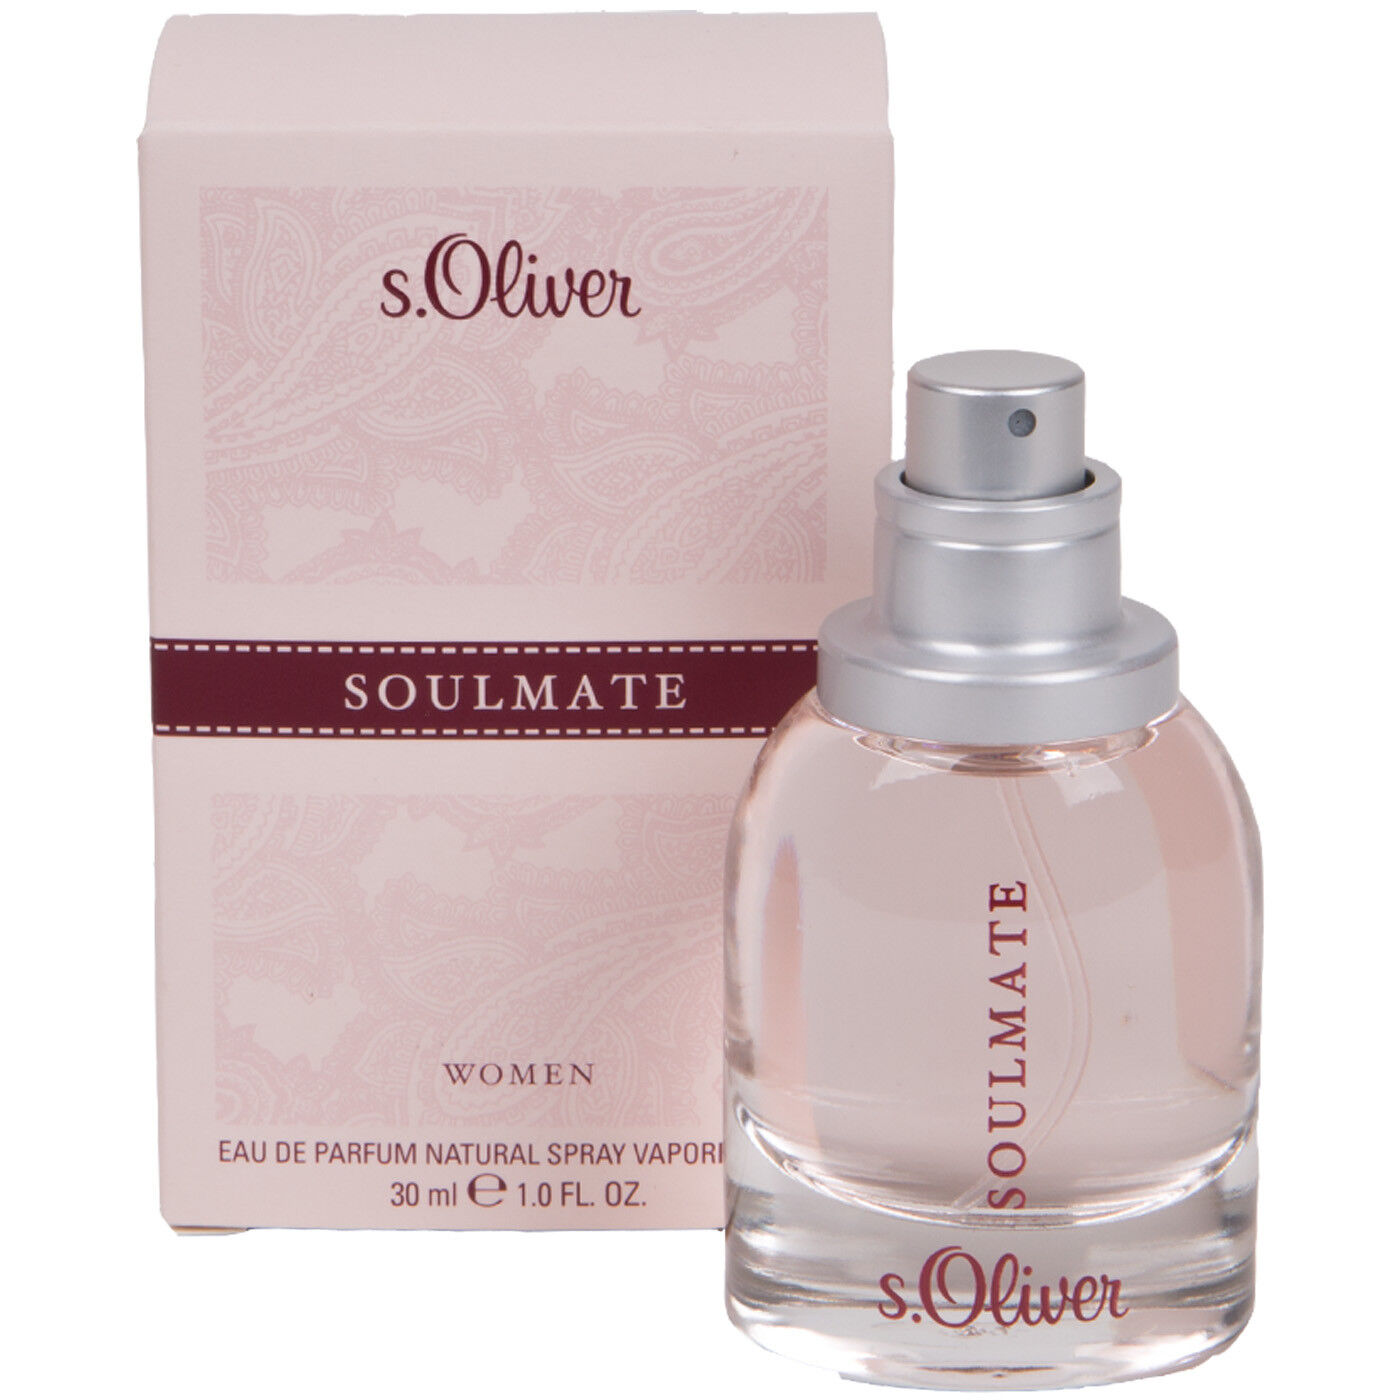 S.Oliver Sales of SALE items from new works Soulmate Women Woman Max 82% OFF Eau Edp Parfum de 30 ML